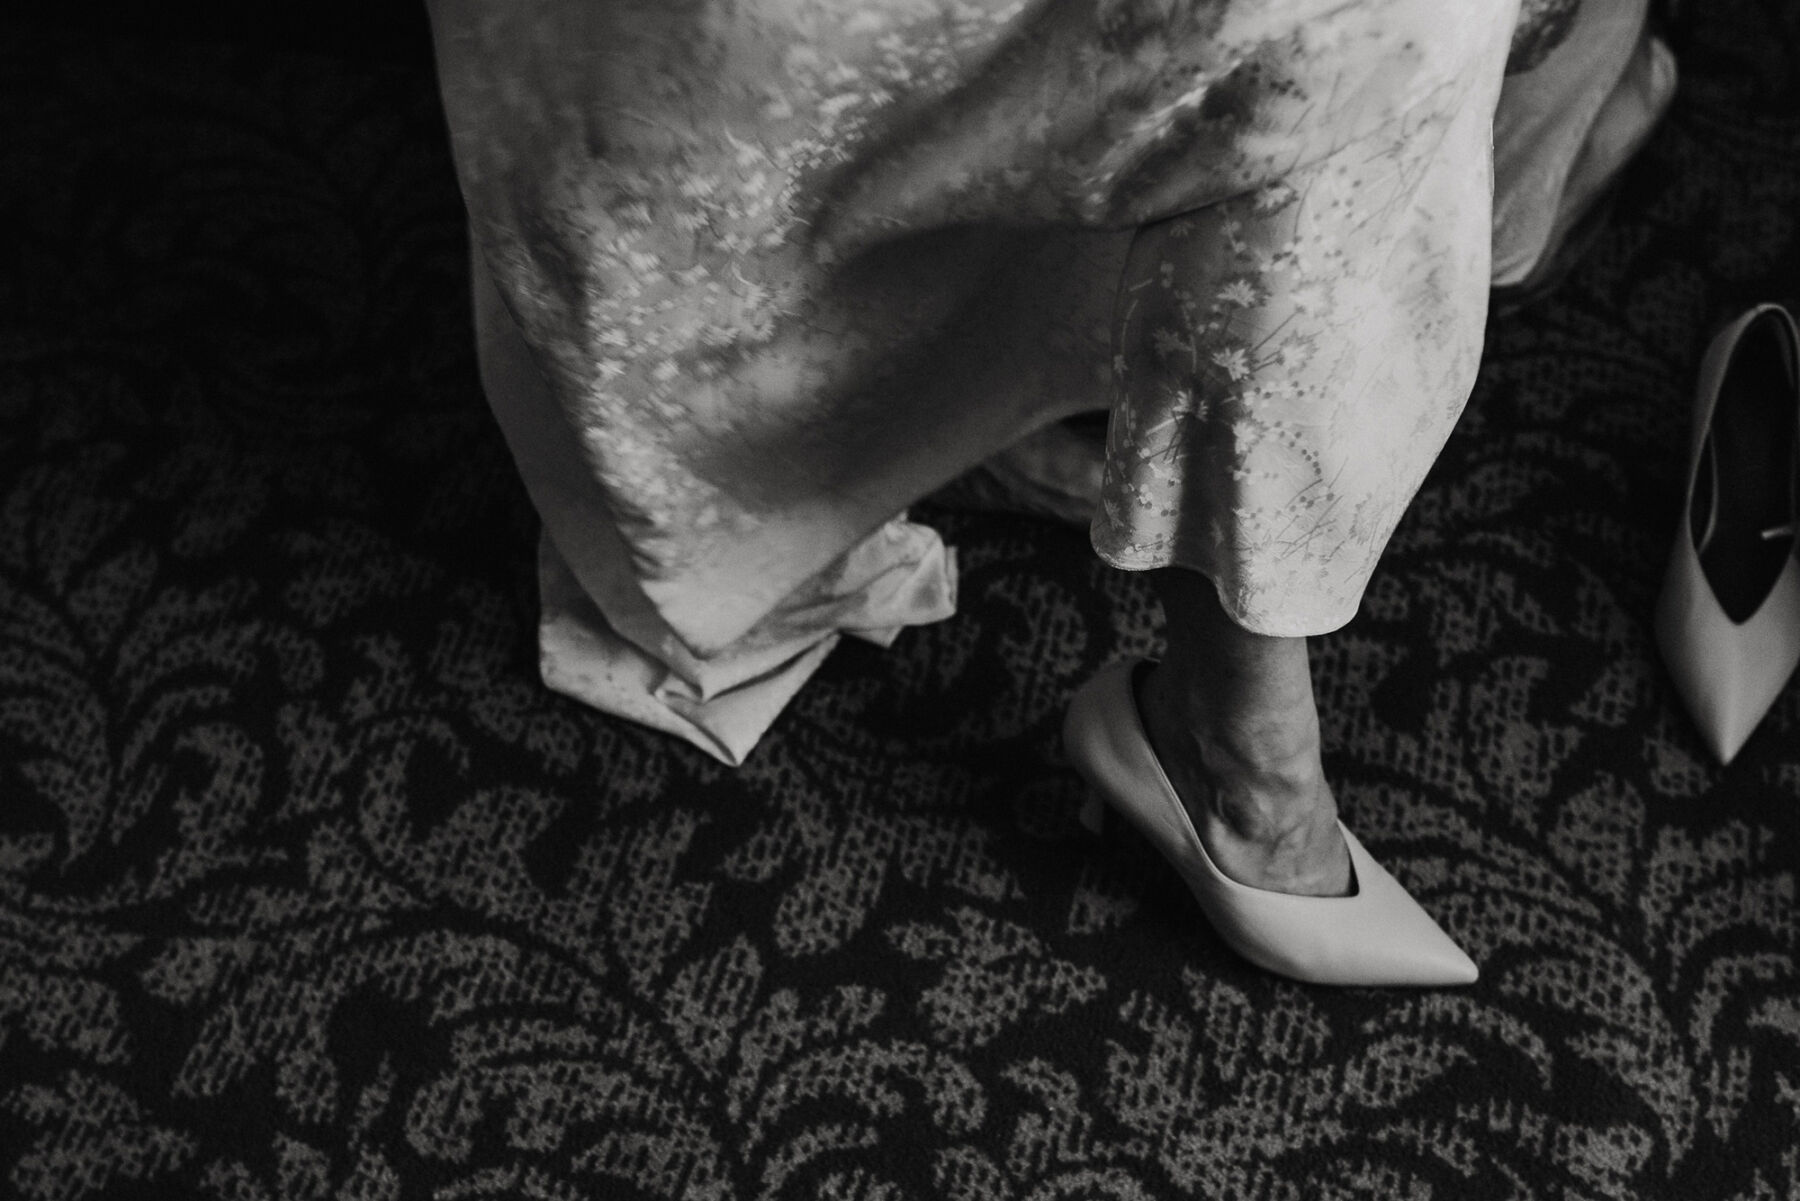 Cream M&S pointed court shoes worn by a bride.